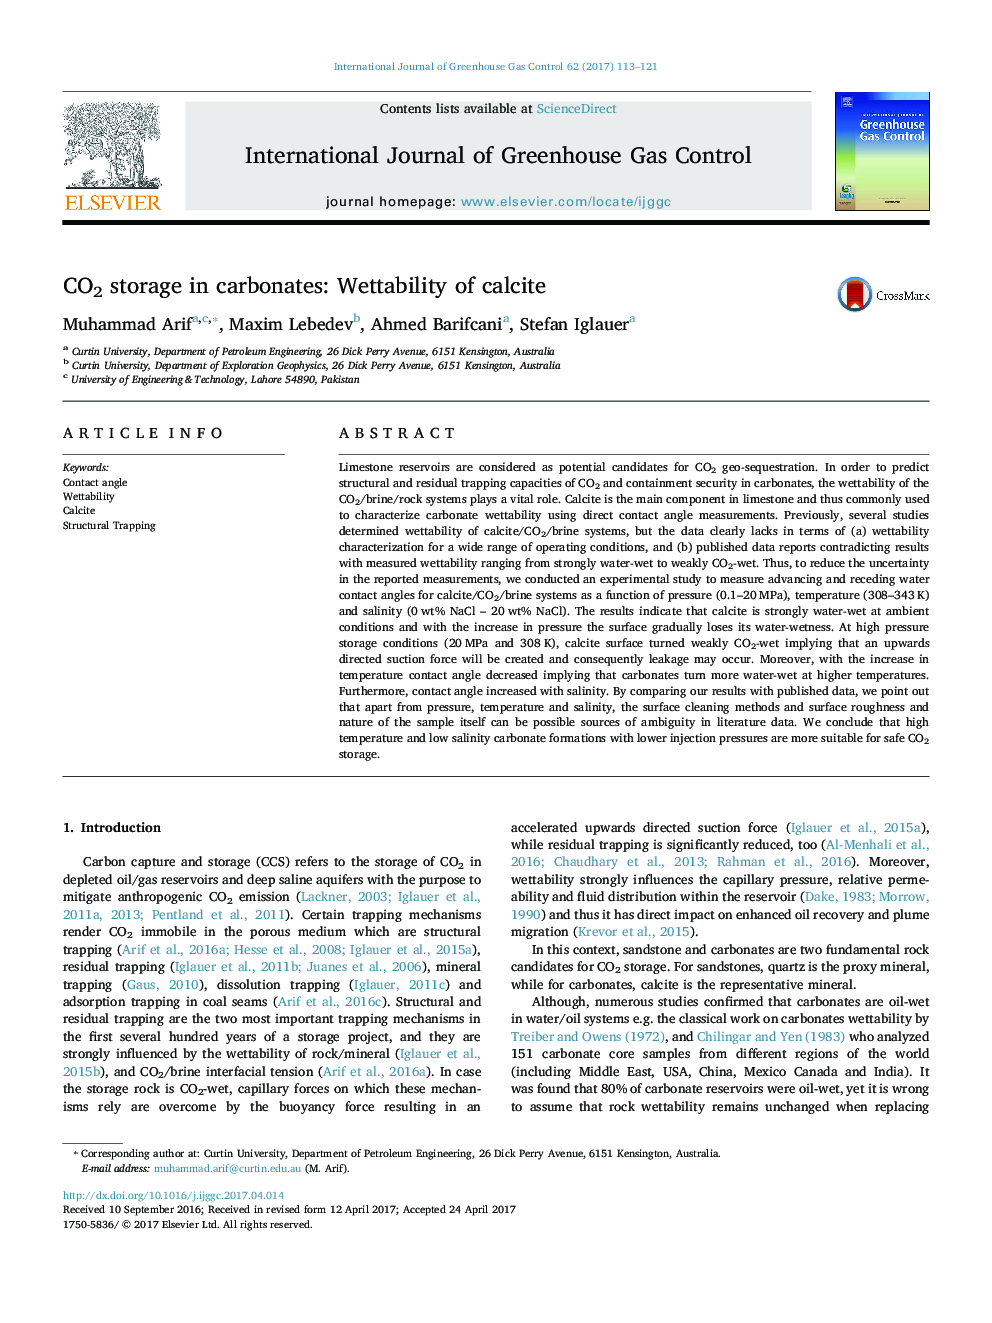 CO2 storage in carbonates: Wettability of calcite